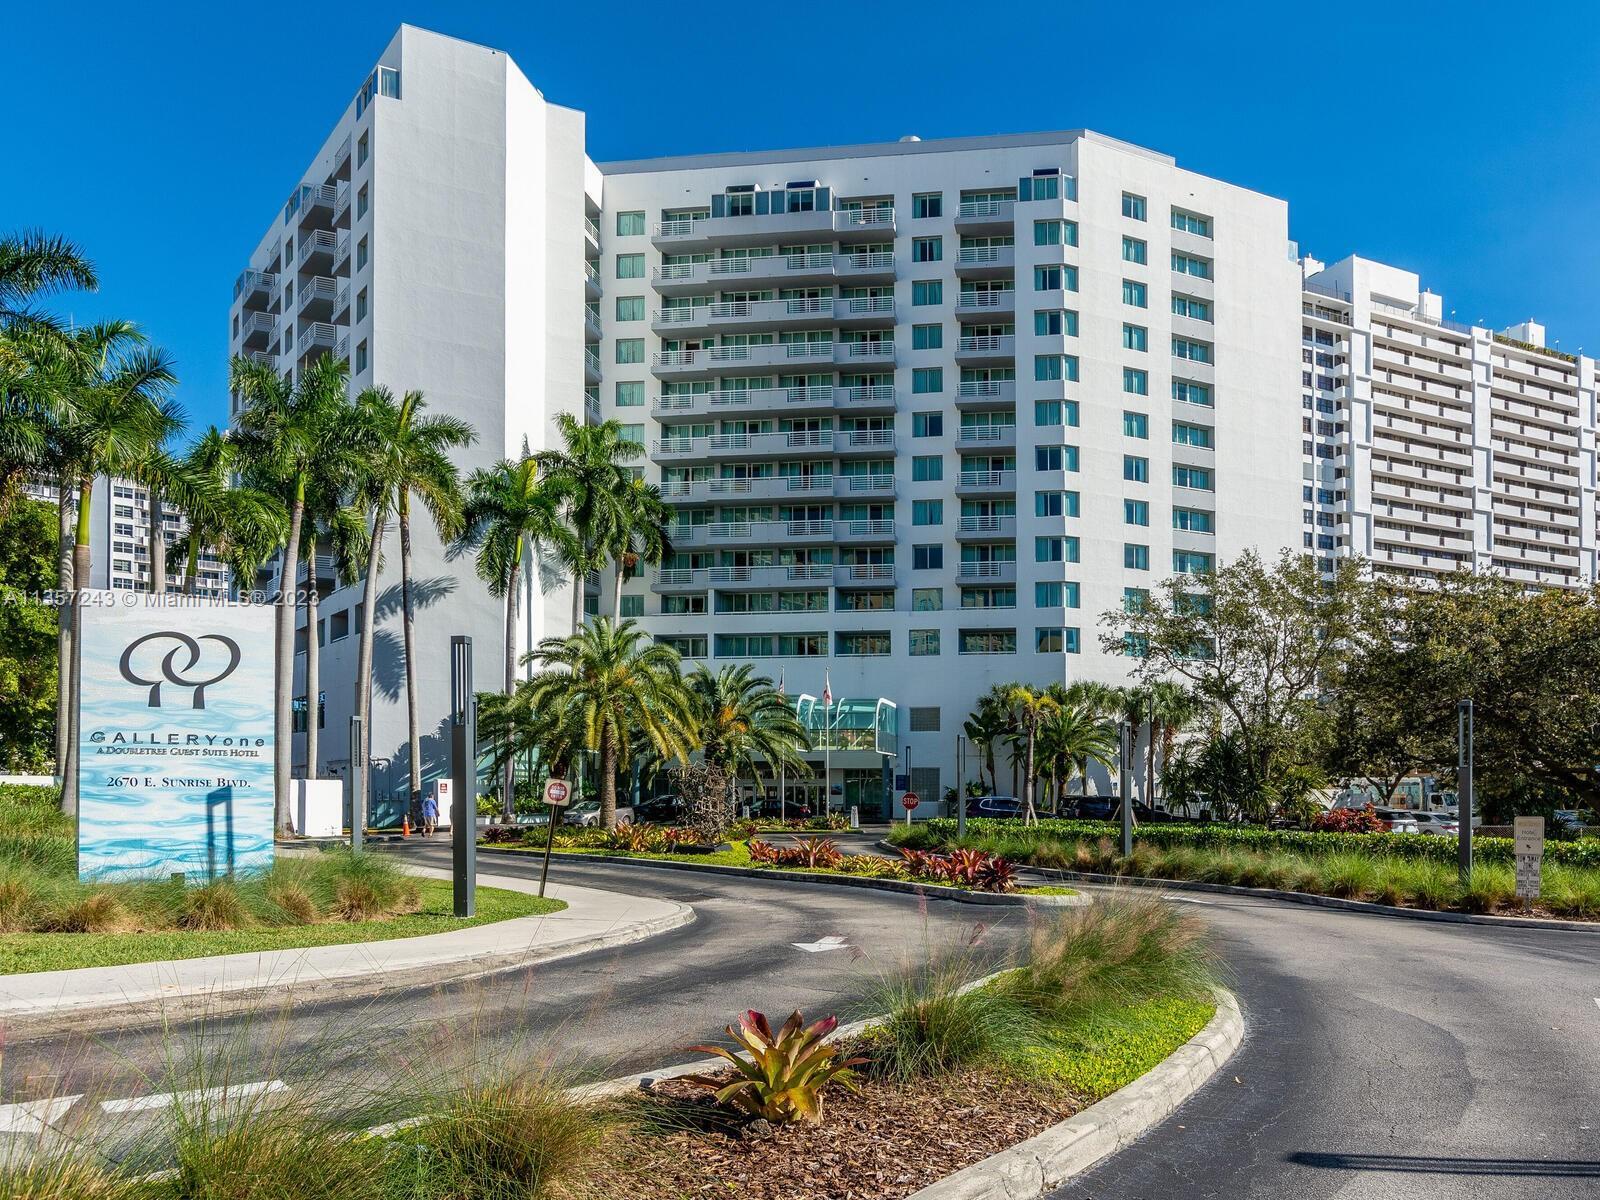 Amazing location in Fort Lauderdale!!! Walking distance to beach/ocean, shopping, restaurants, and a